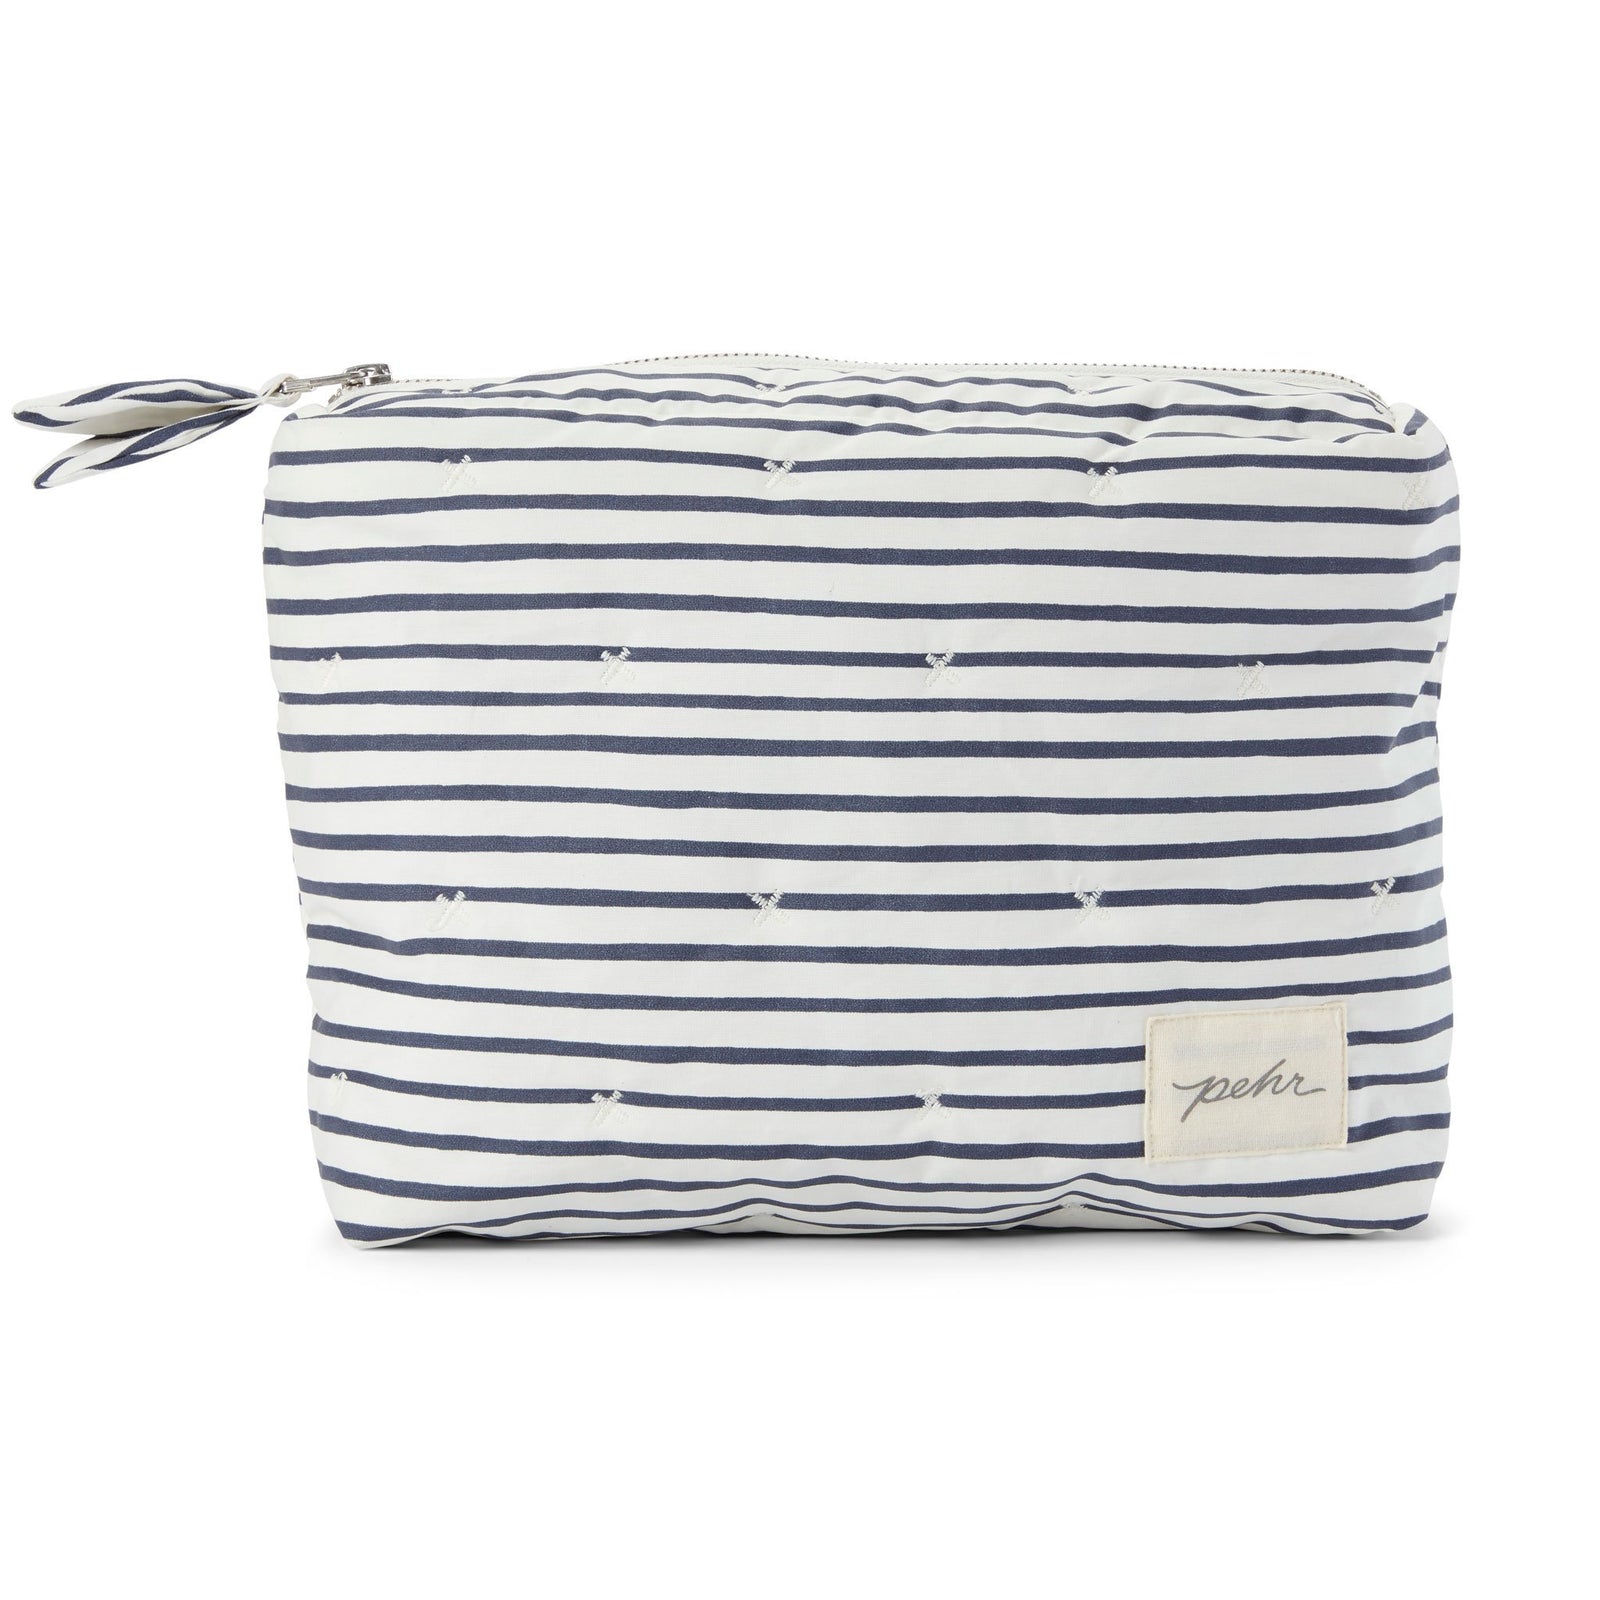 Pehr Ink Blue Organic On The Go Travel Pouch. GOTS Certified Organic Cotton & Dyes. White with dark blue stripes and zippered close.